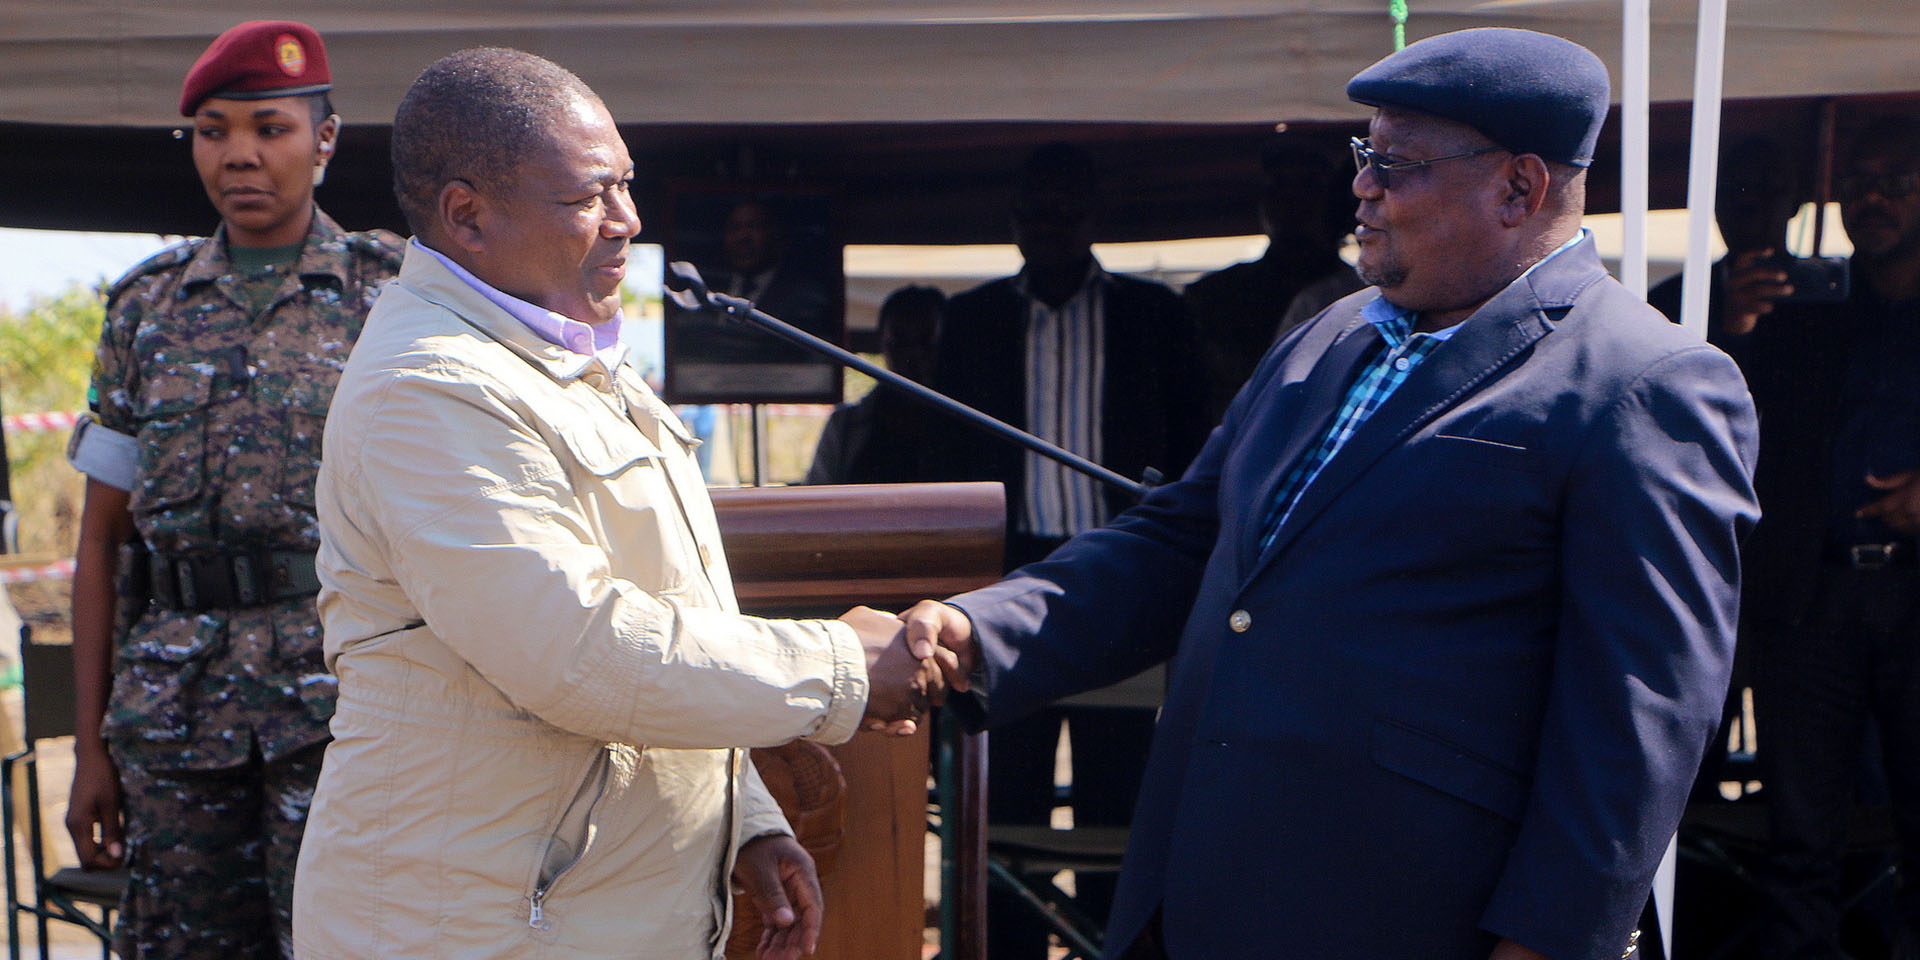  The president of the RENAMO movement and the president of Mozambique shake hands.